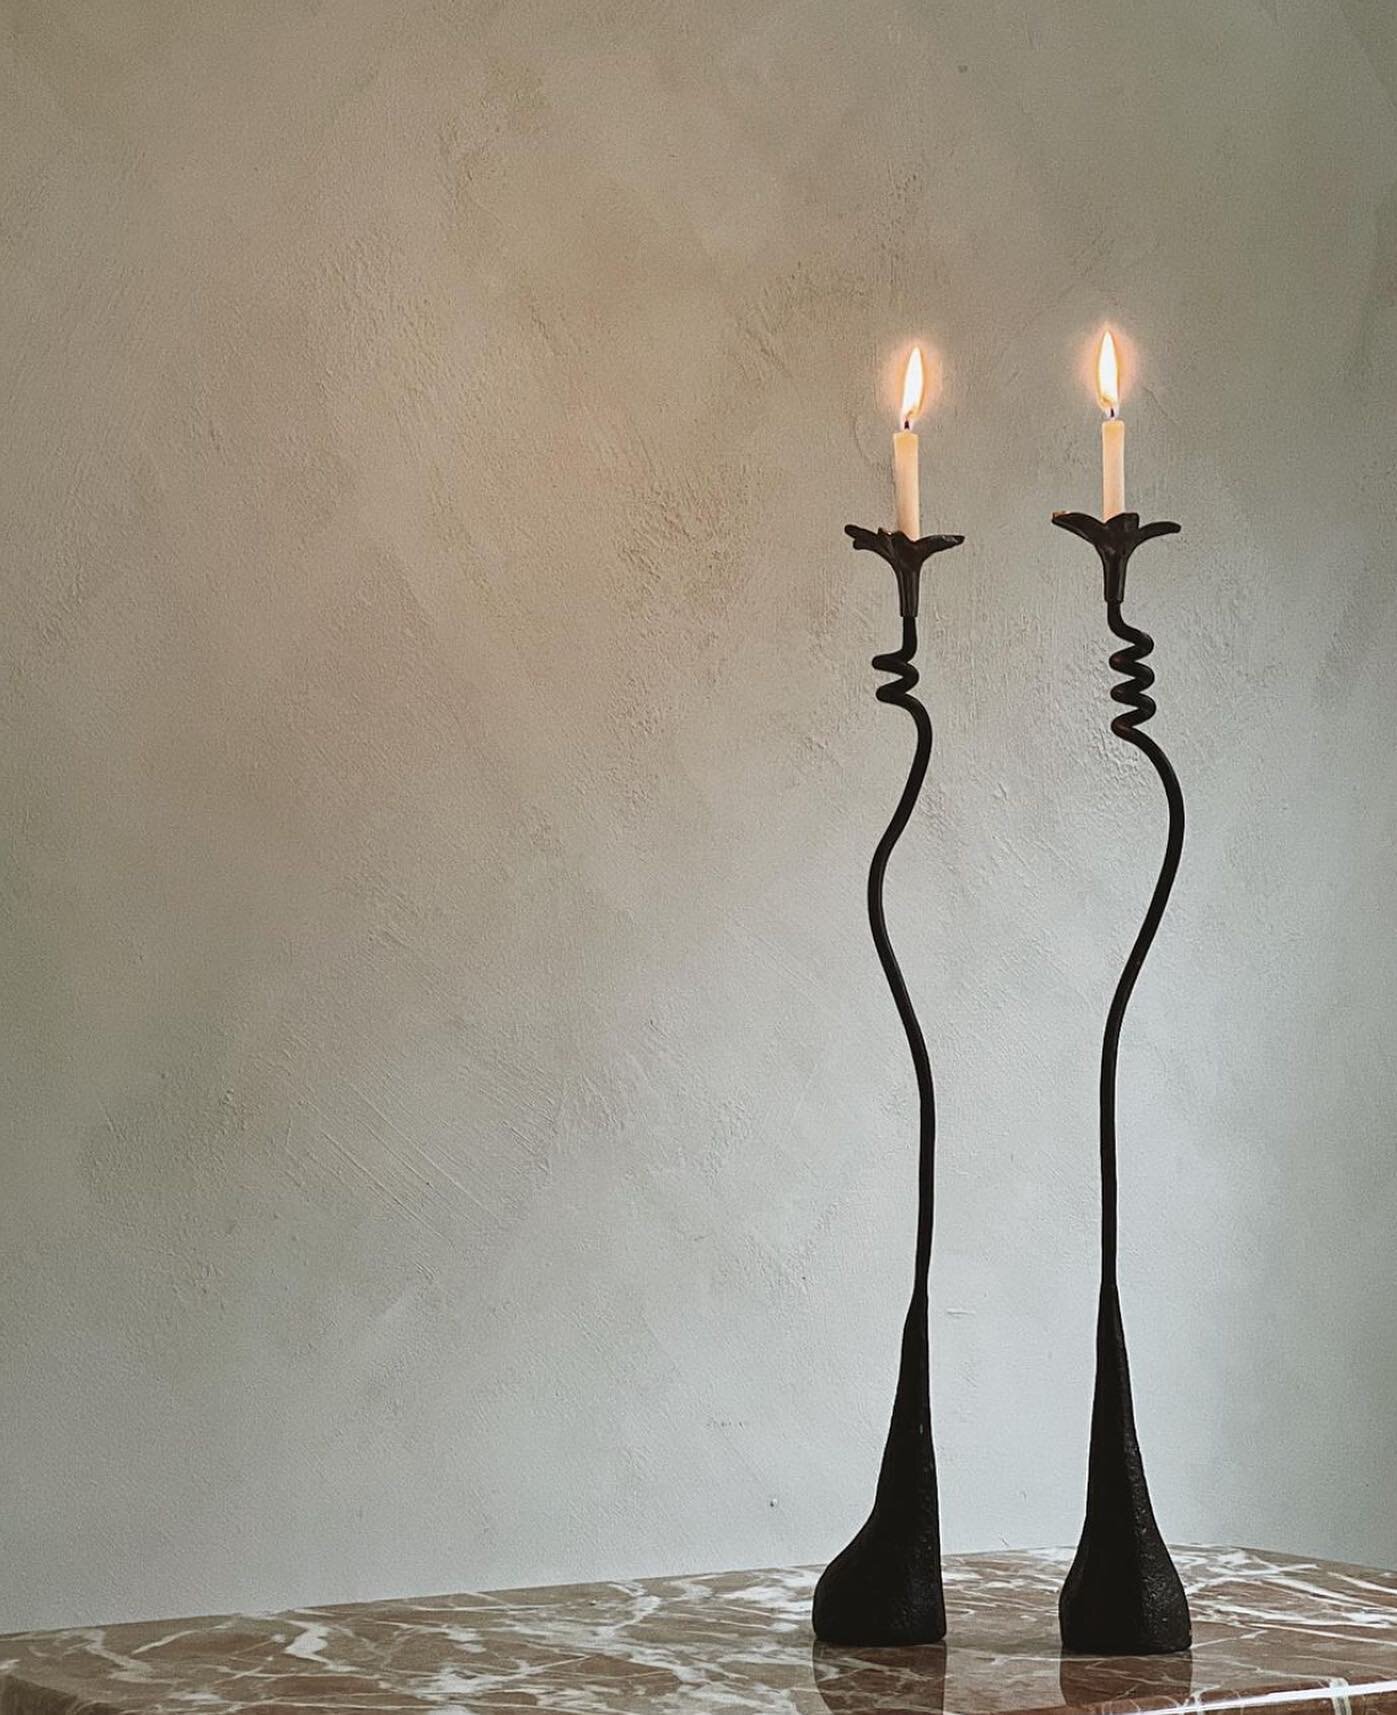 Tall, slender, with a little squiggle candlestick holders by the gorgeous @les.collection 

#interiordesign #design #interior #homedecor #architecture #home #decor #interiors #homedesign #furniture #art #interiordesigner #decoration #luxury #designer